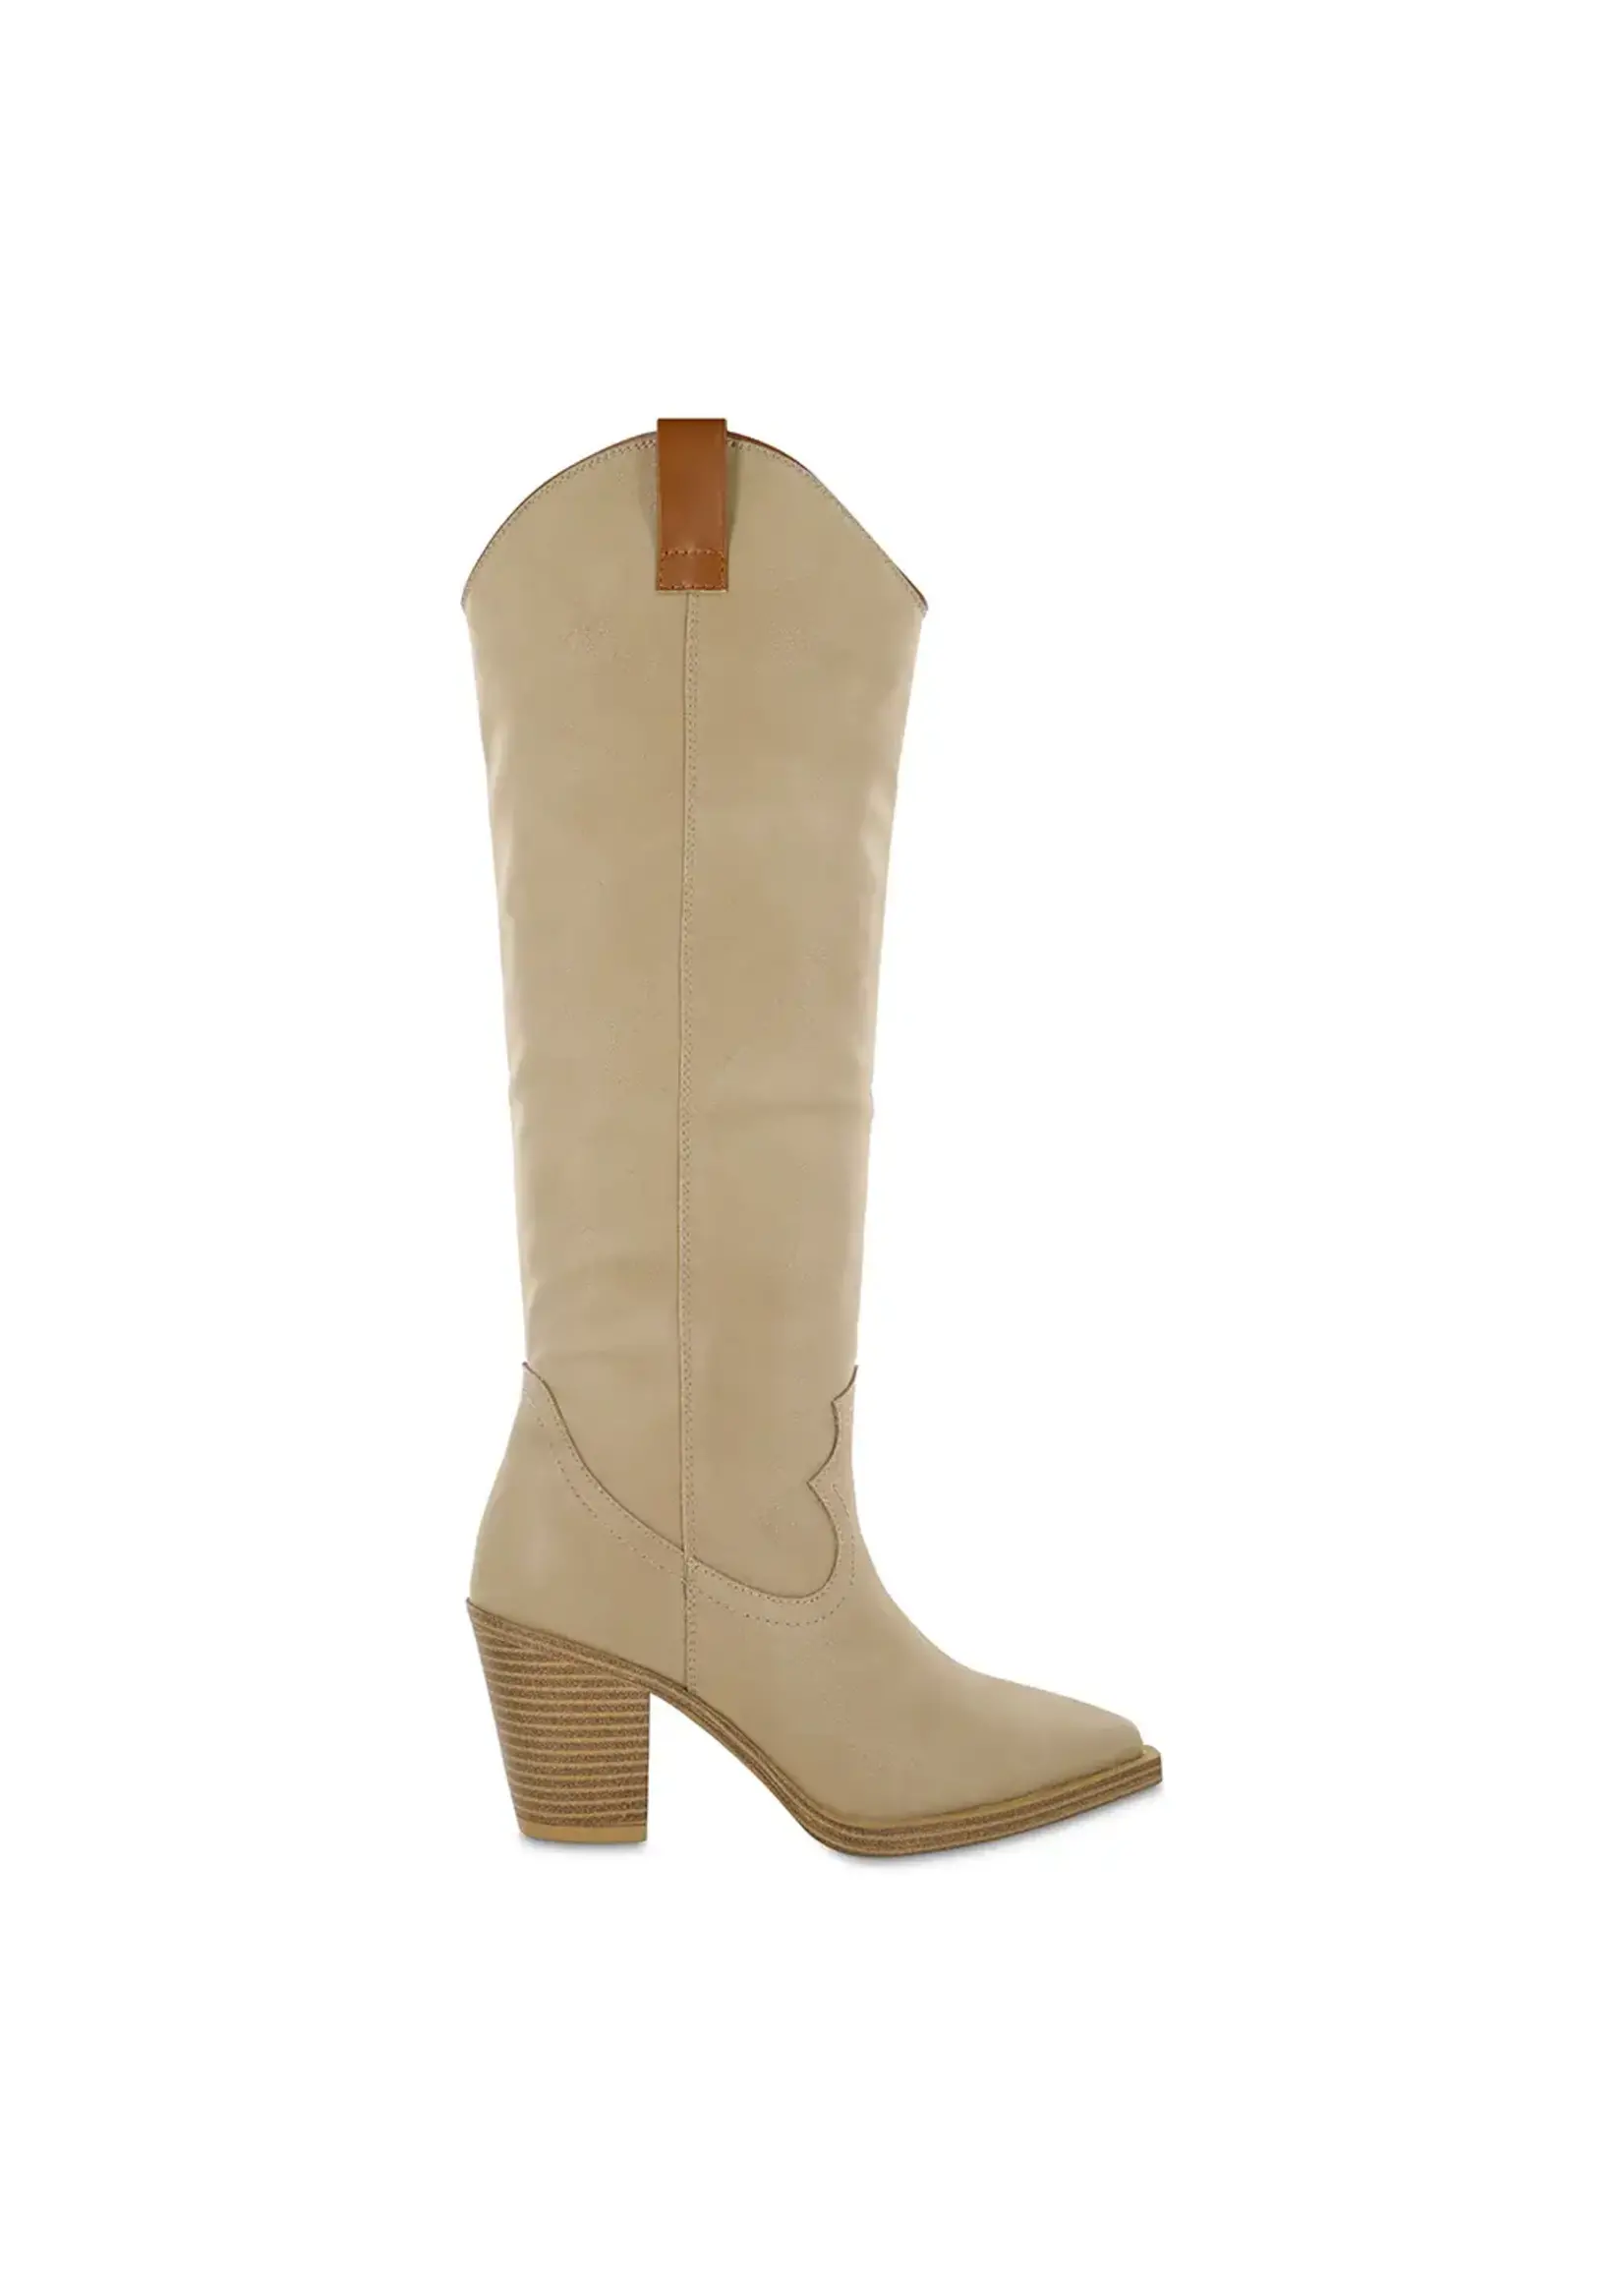 Mia Shoes Archer Western Knee High Boot in Stone by MIA